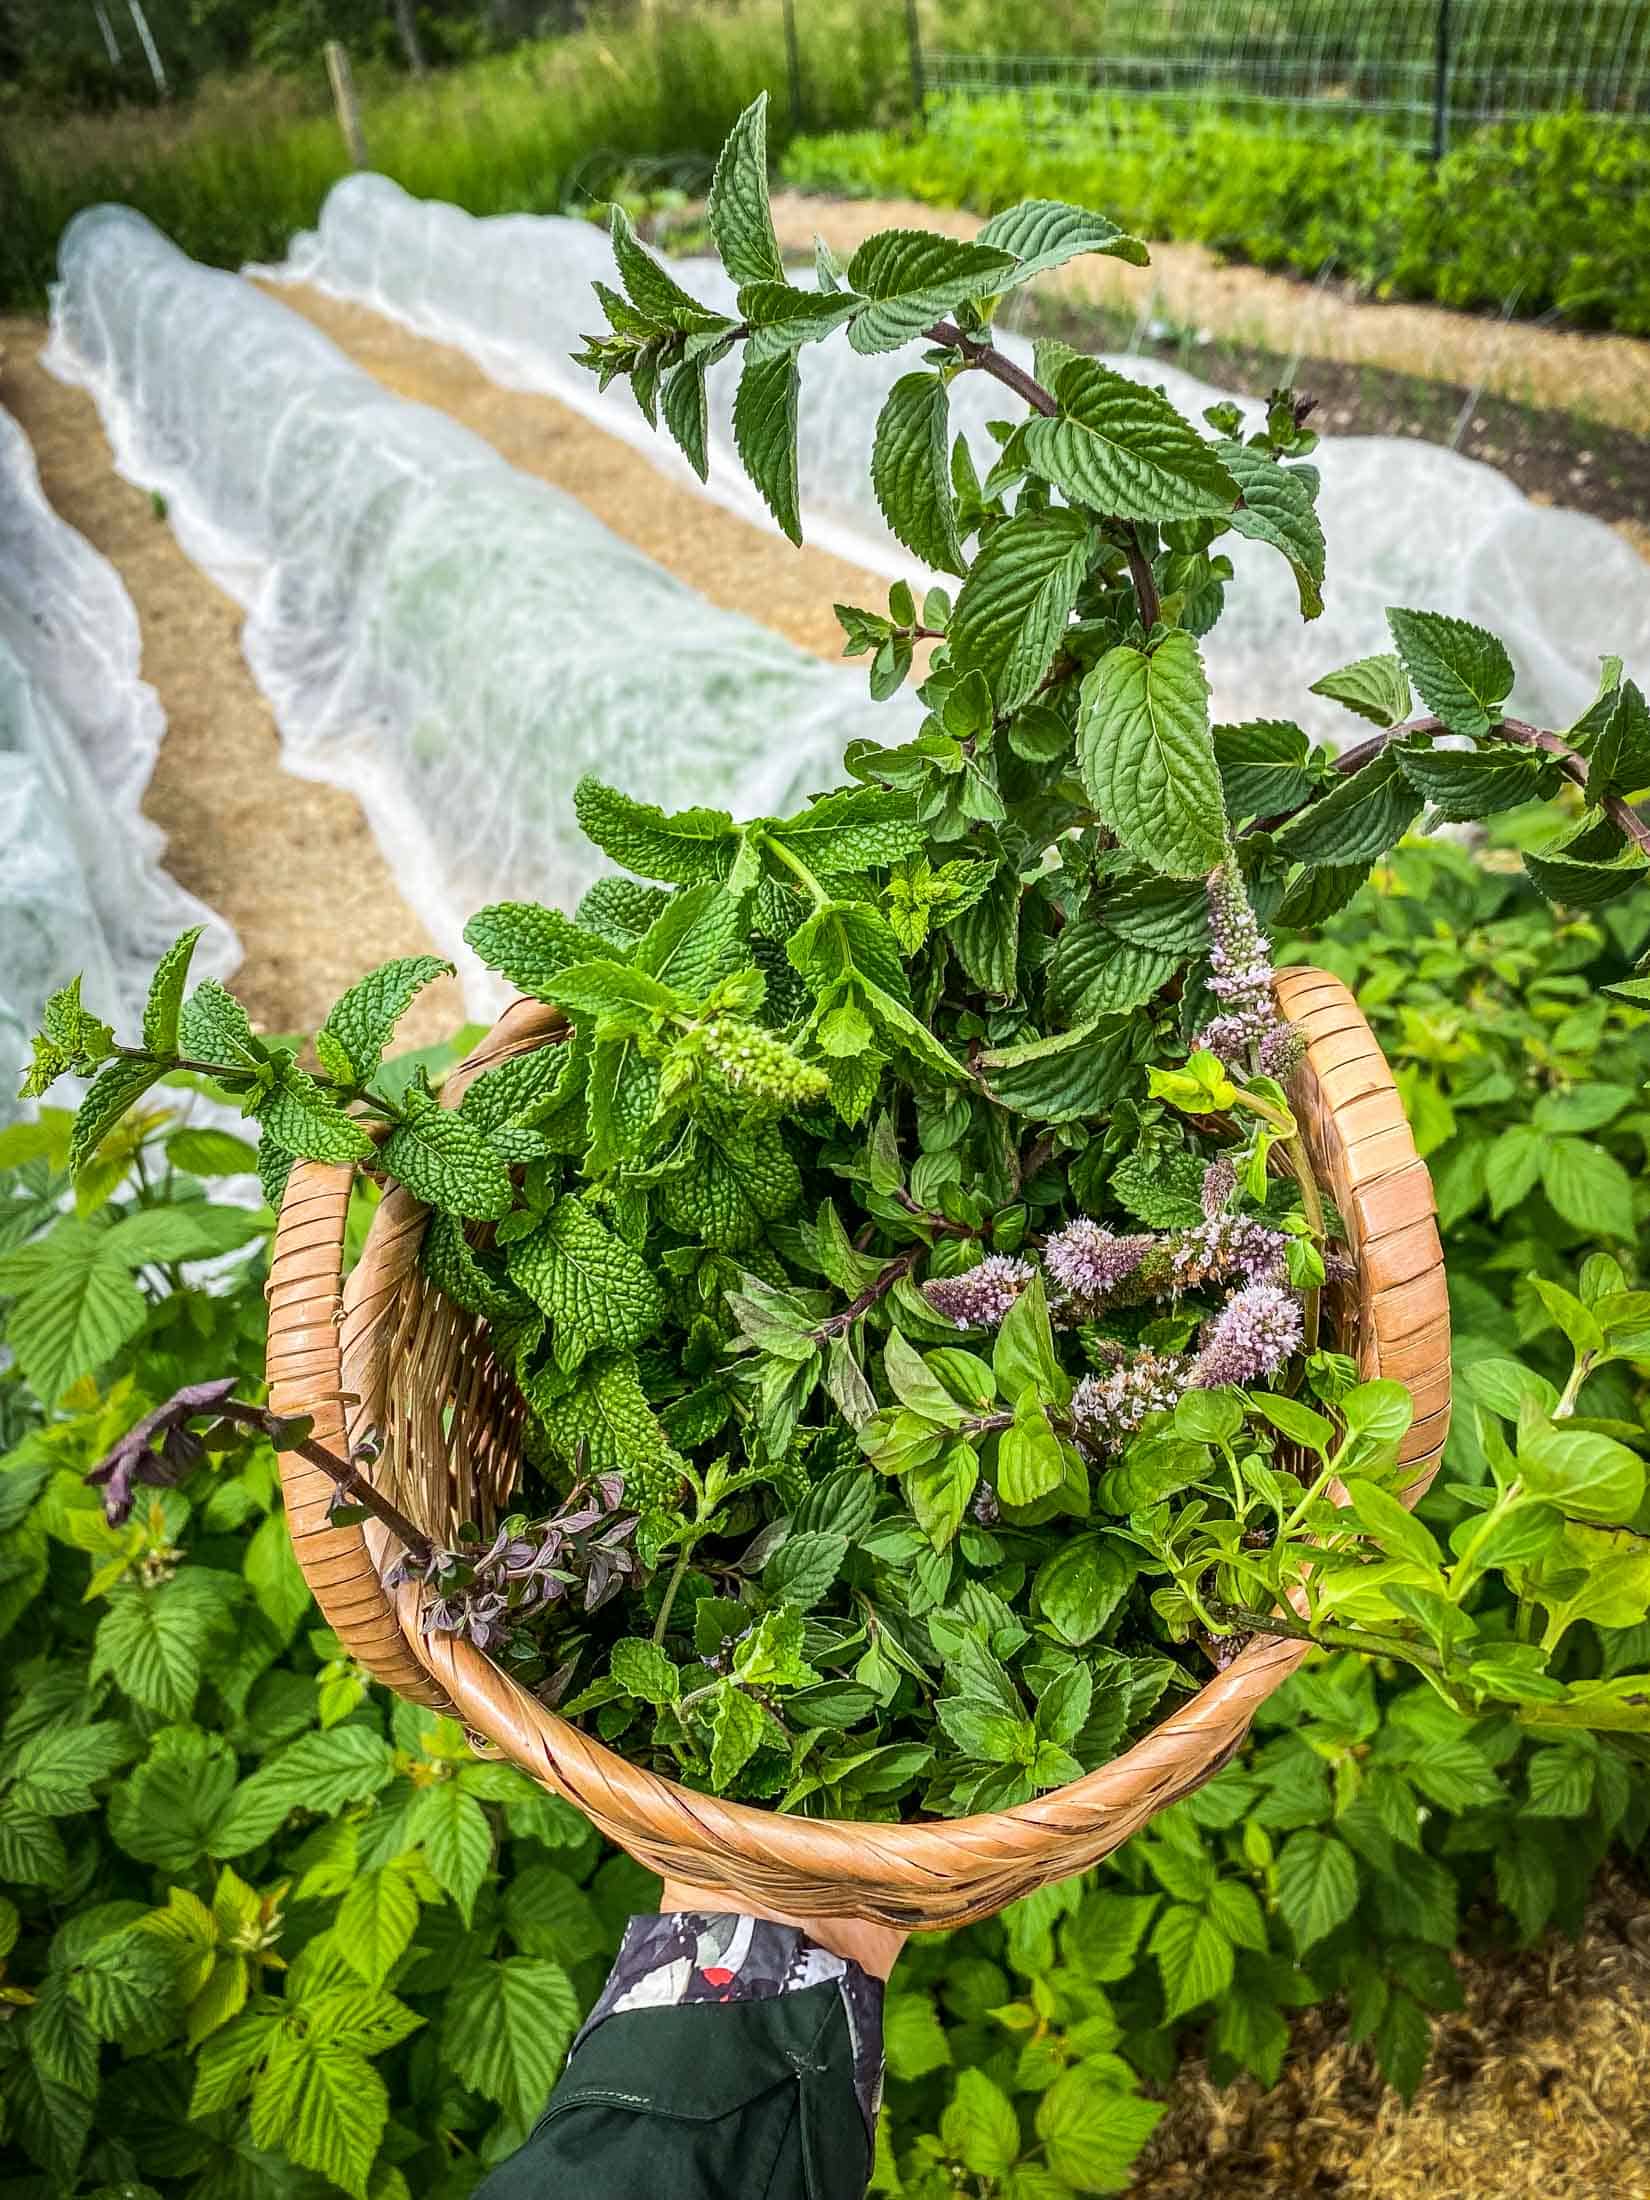 A wicker basket full of different varieties of mint with a garden in the backdrop.